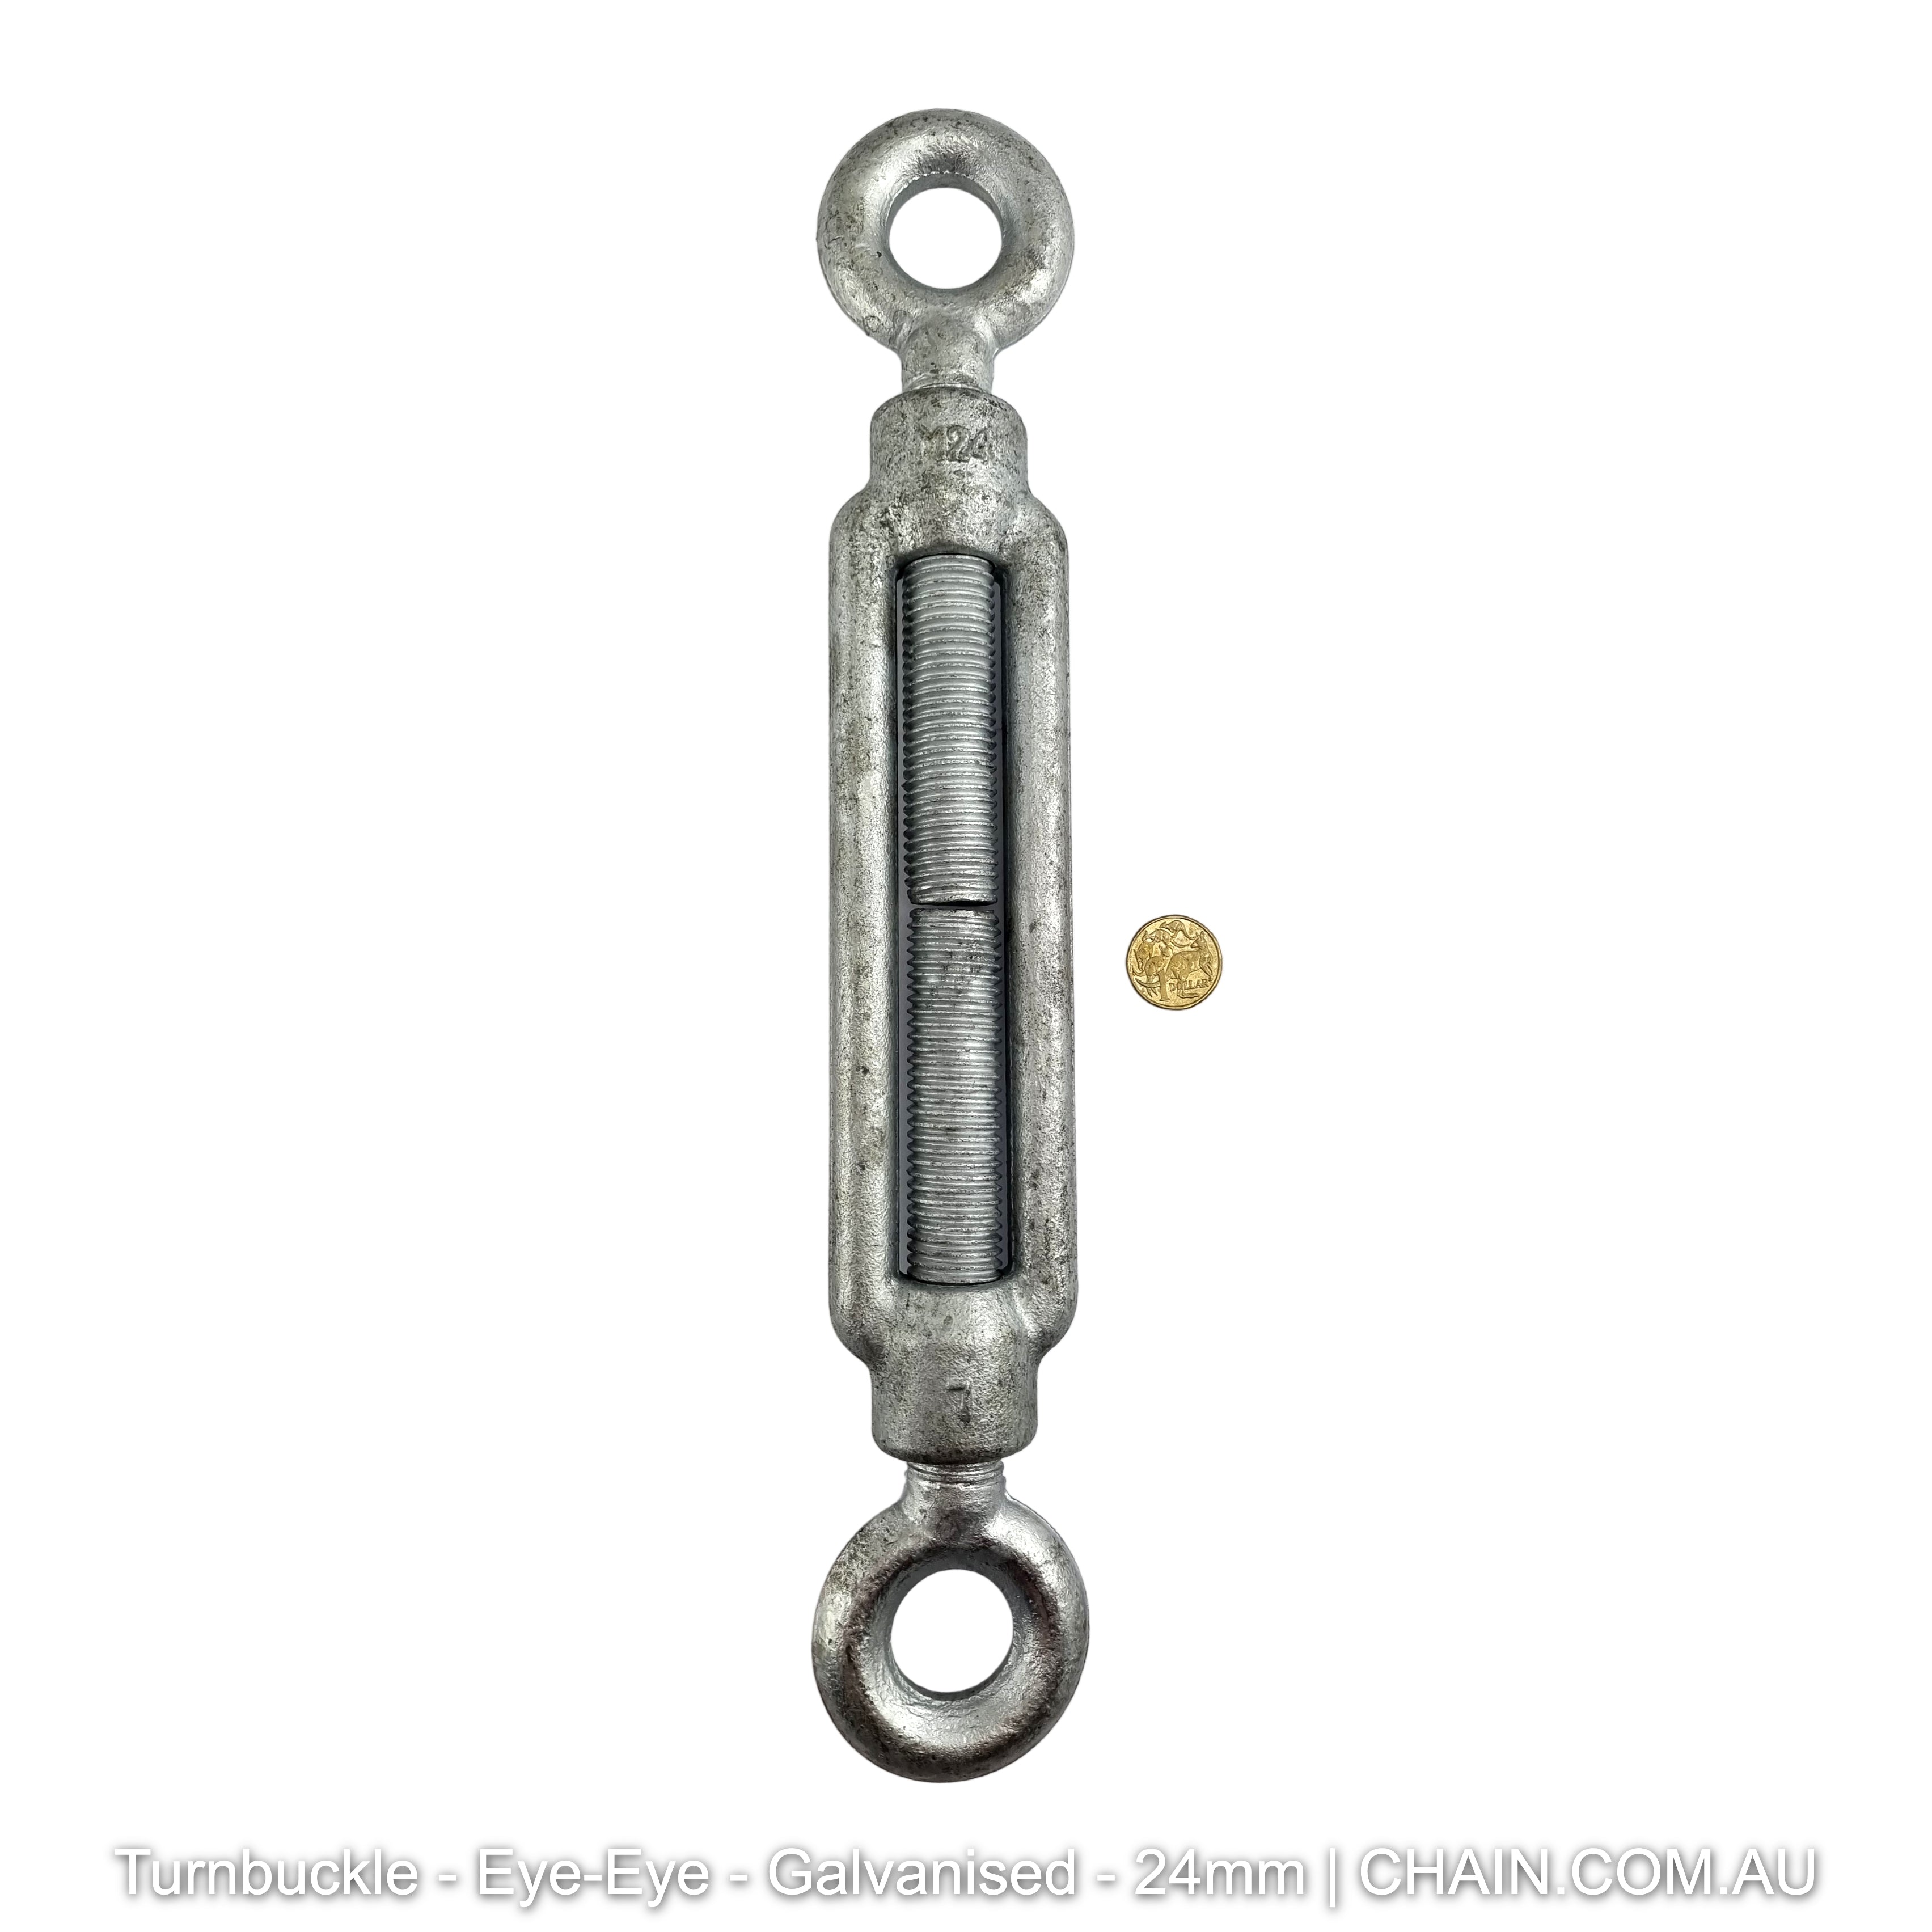 24mm Eye-Eye Turnbuckle Galvanised. Shop hardware online chain.com.au. Australia wide delivery & Melbourne click & collect.